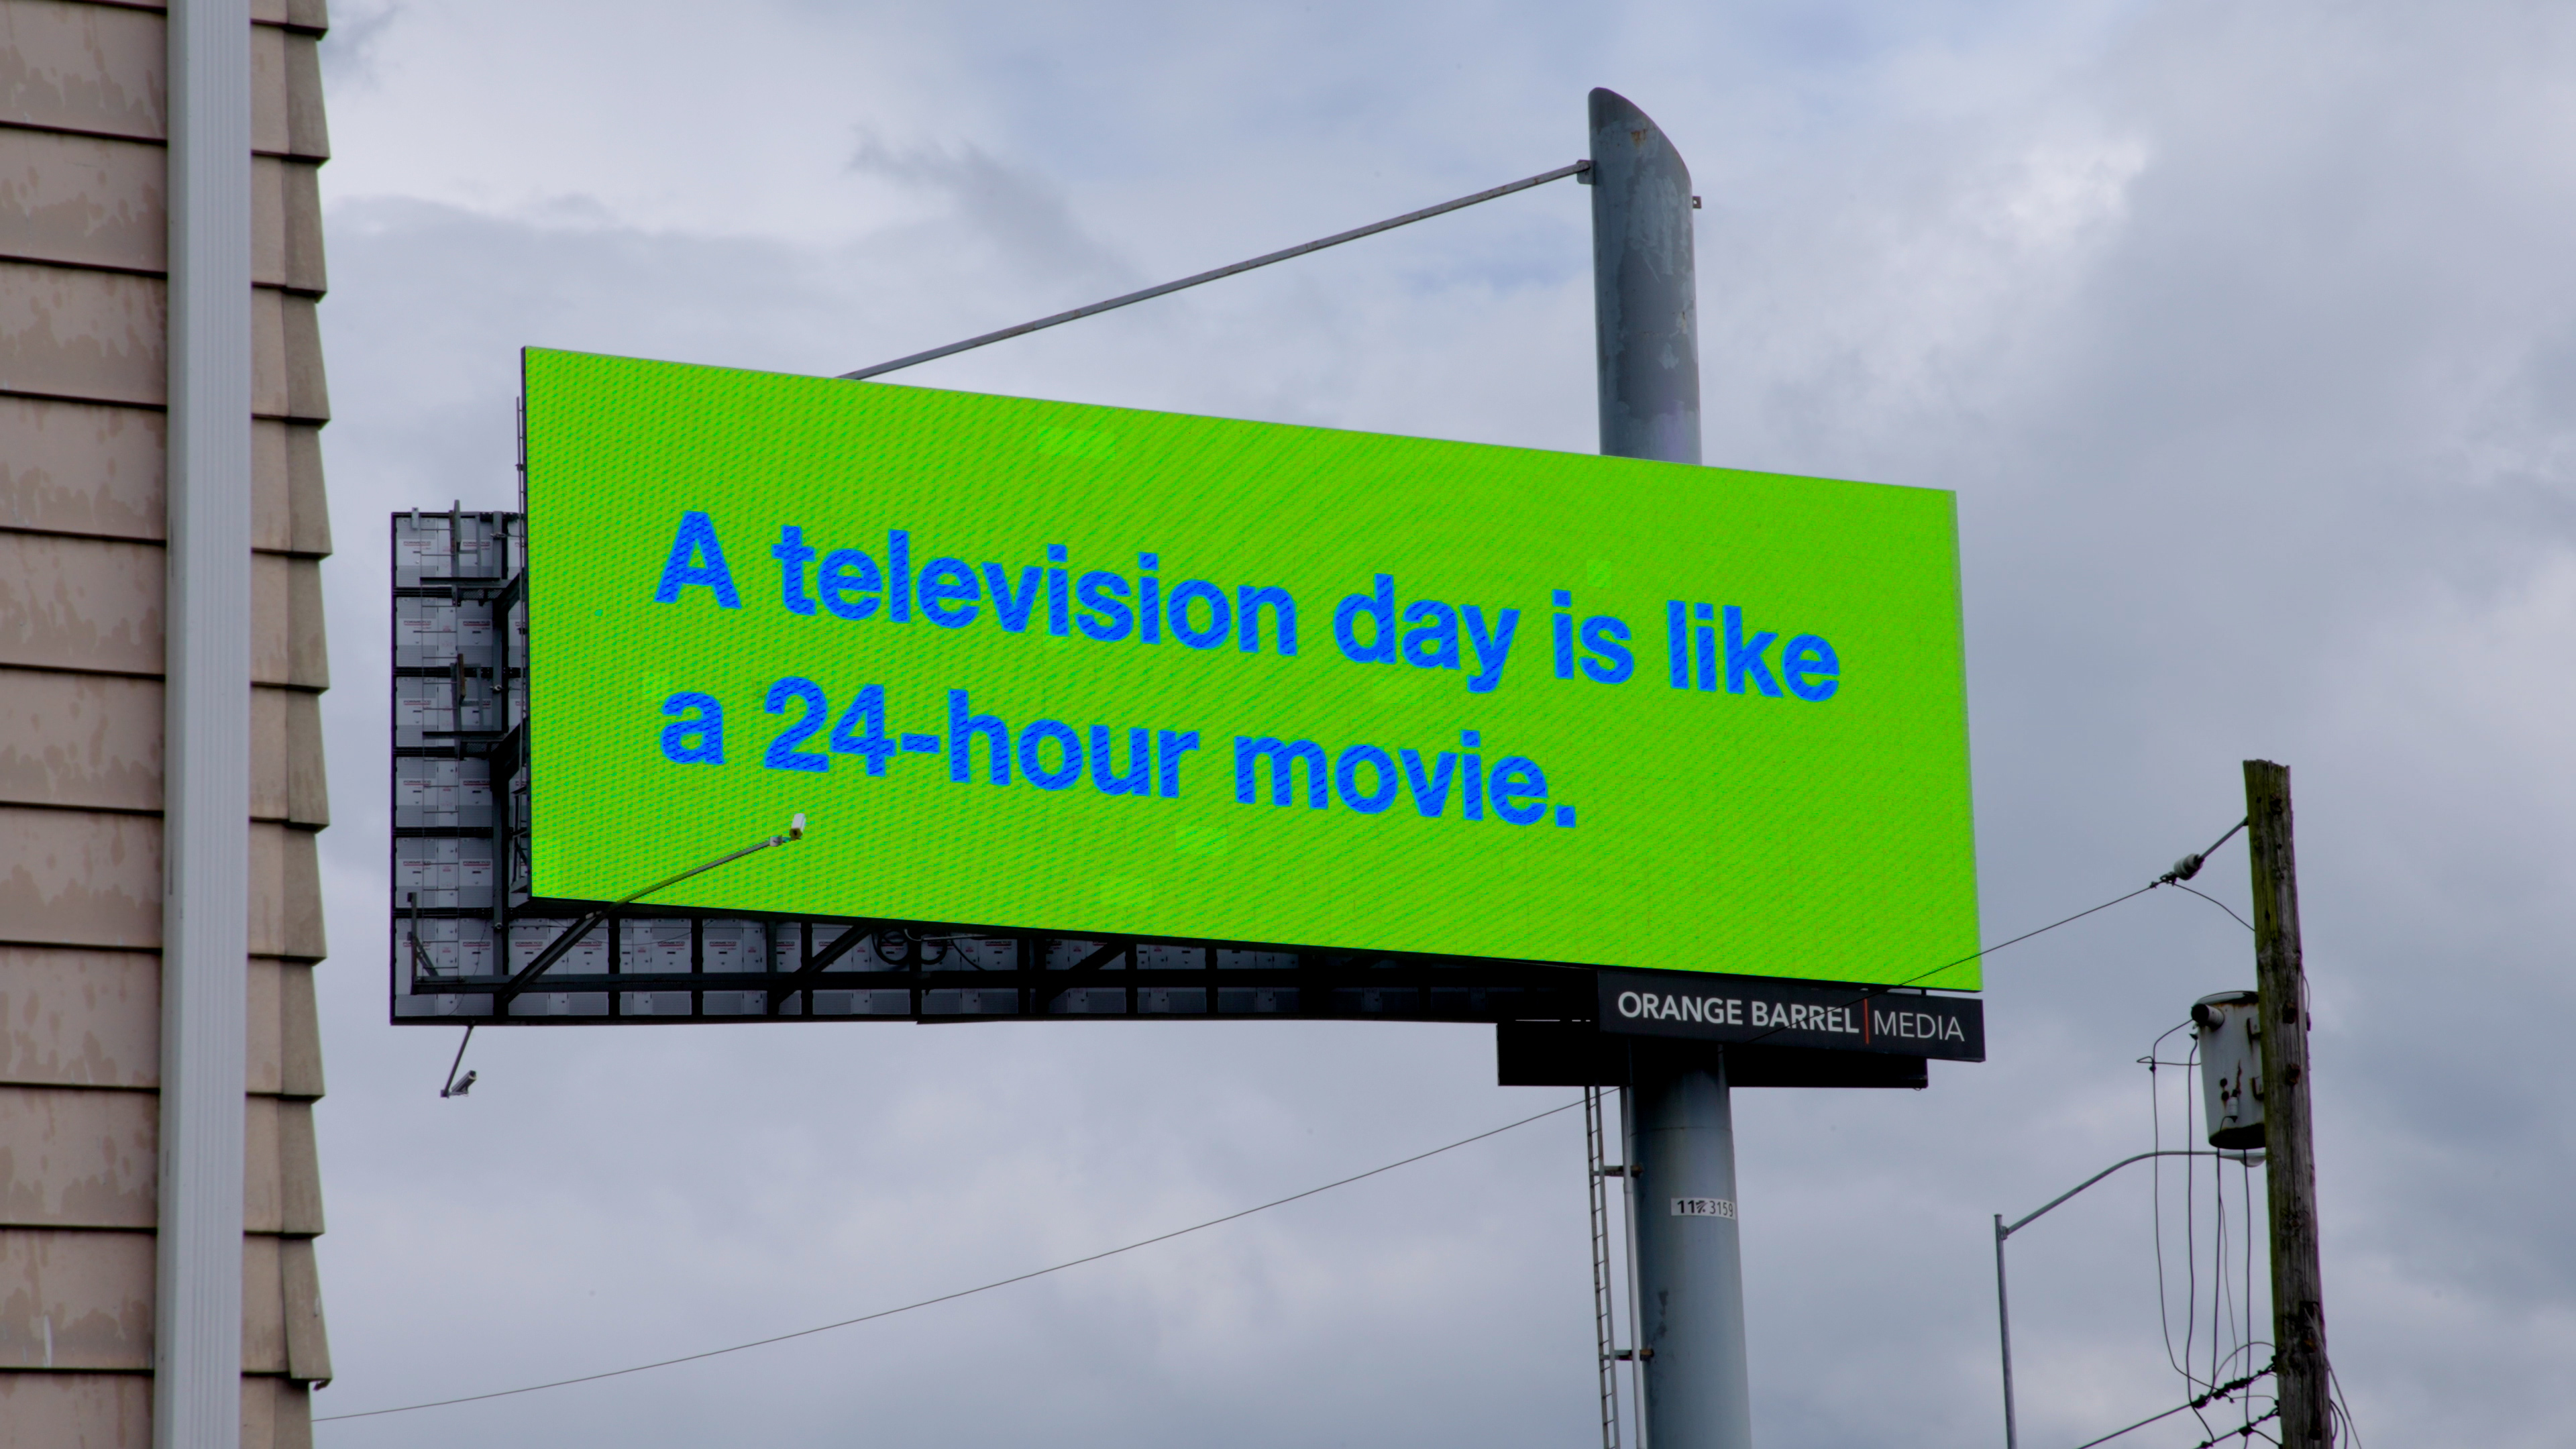 a billboard that says: A television day is like a 24-hour movie